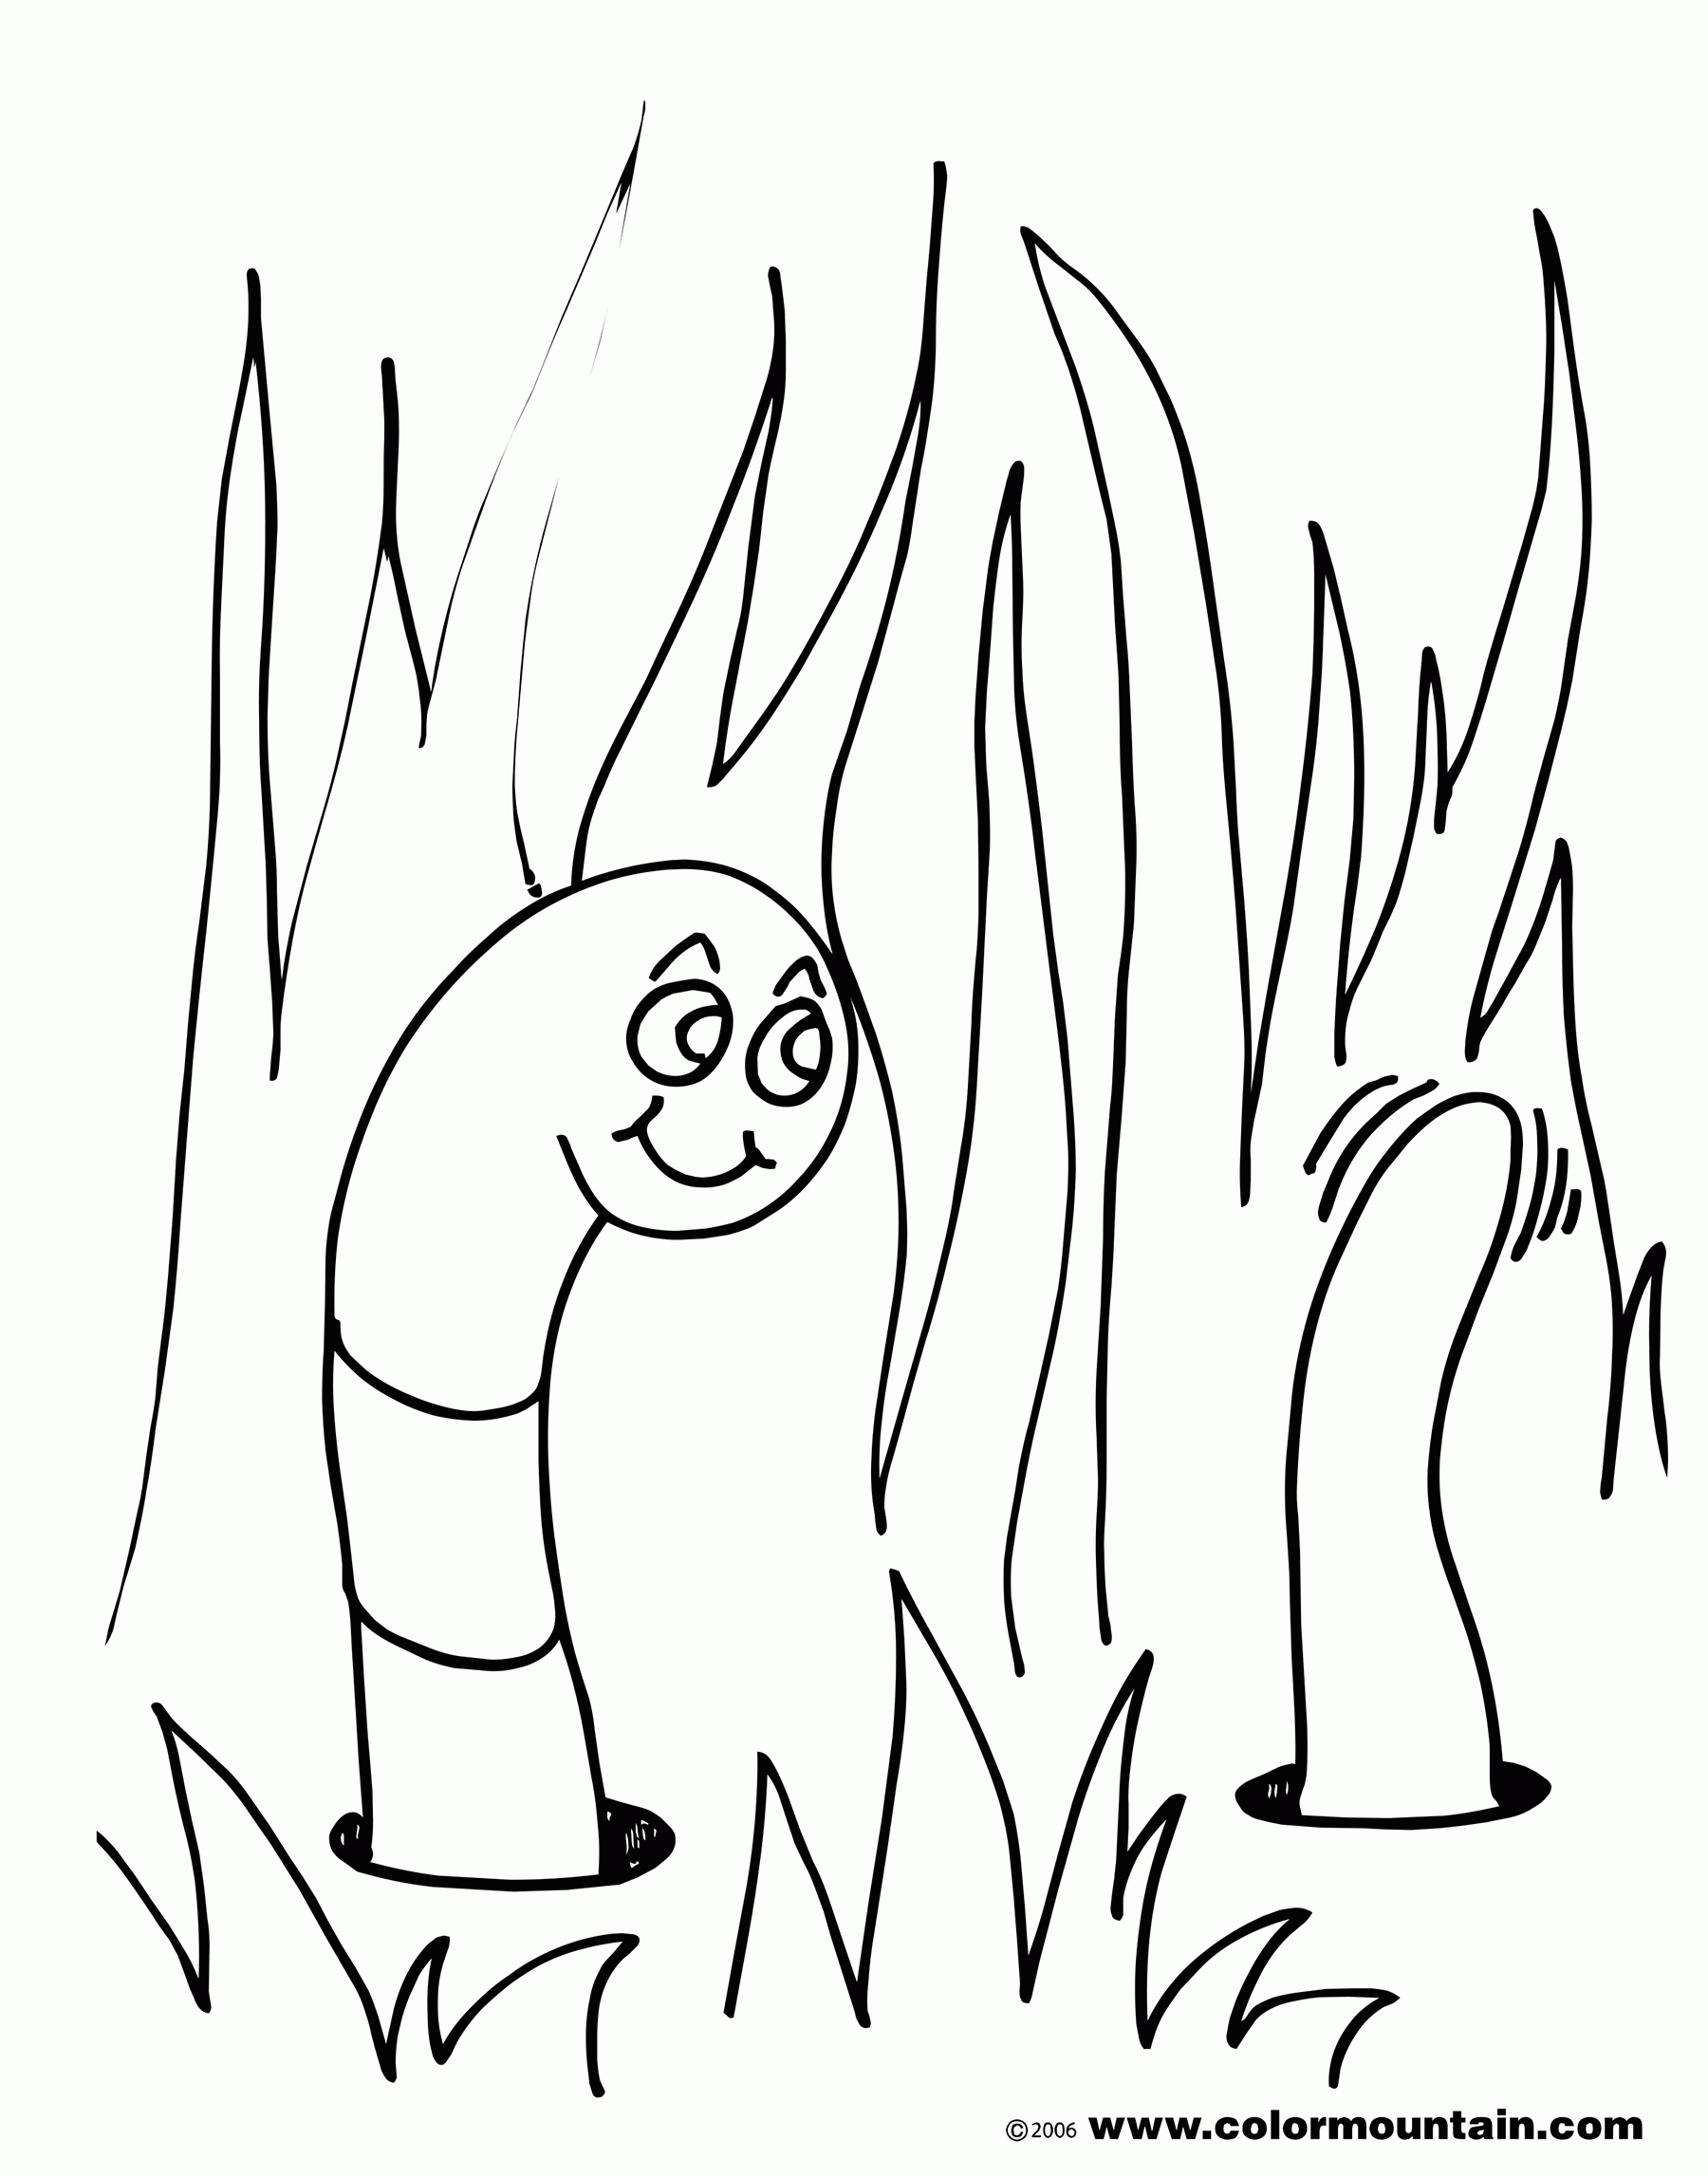 Free Worm Coloring Page - Create A Printout Or Activity